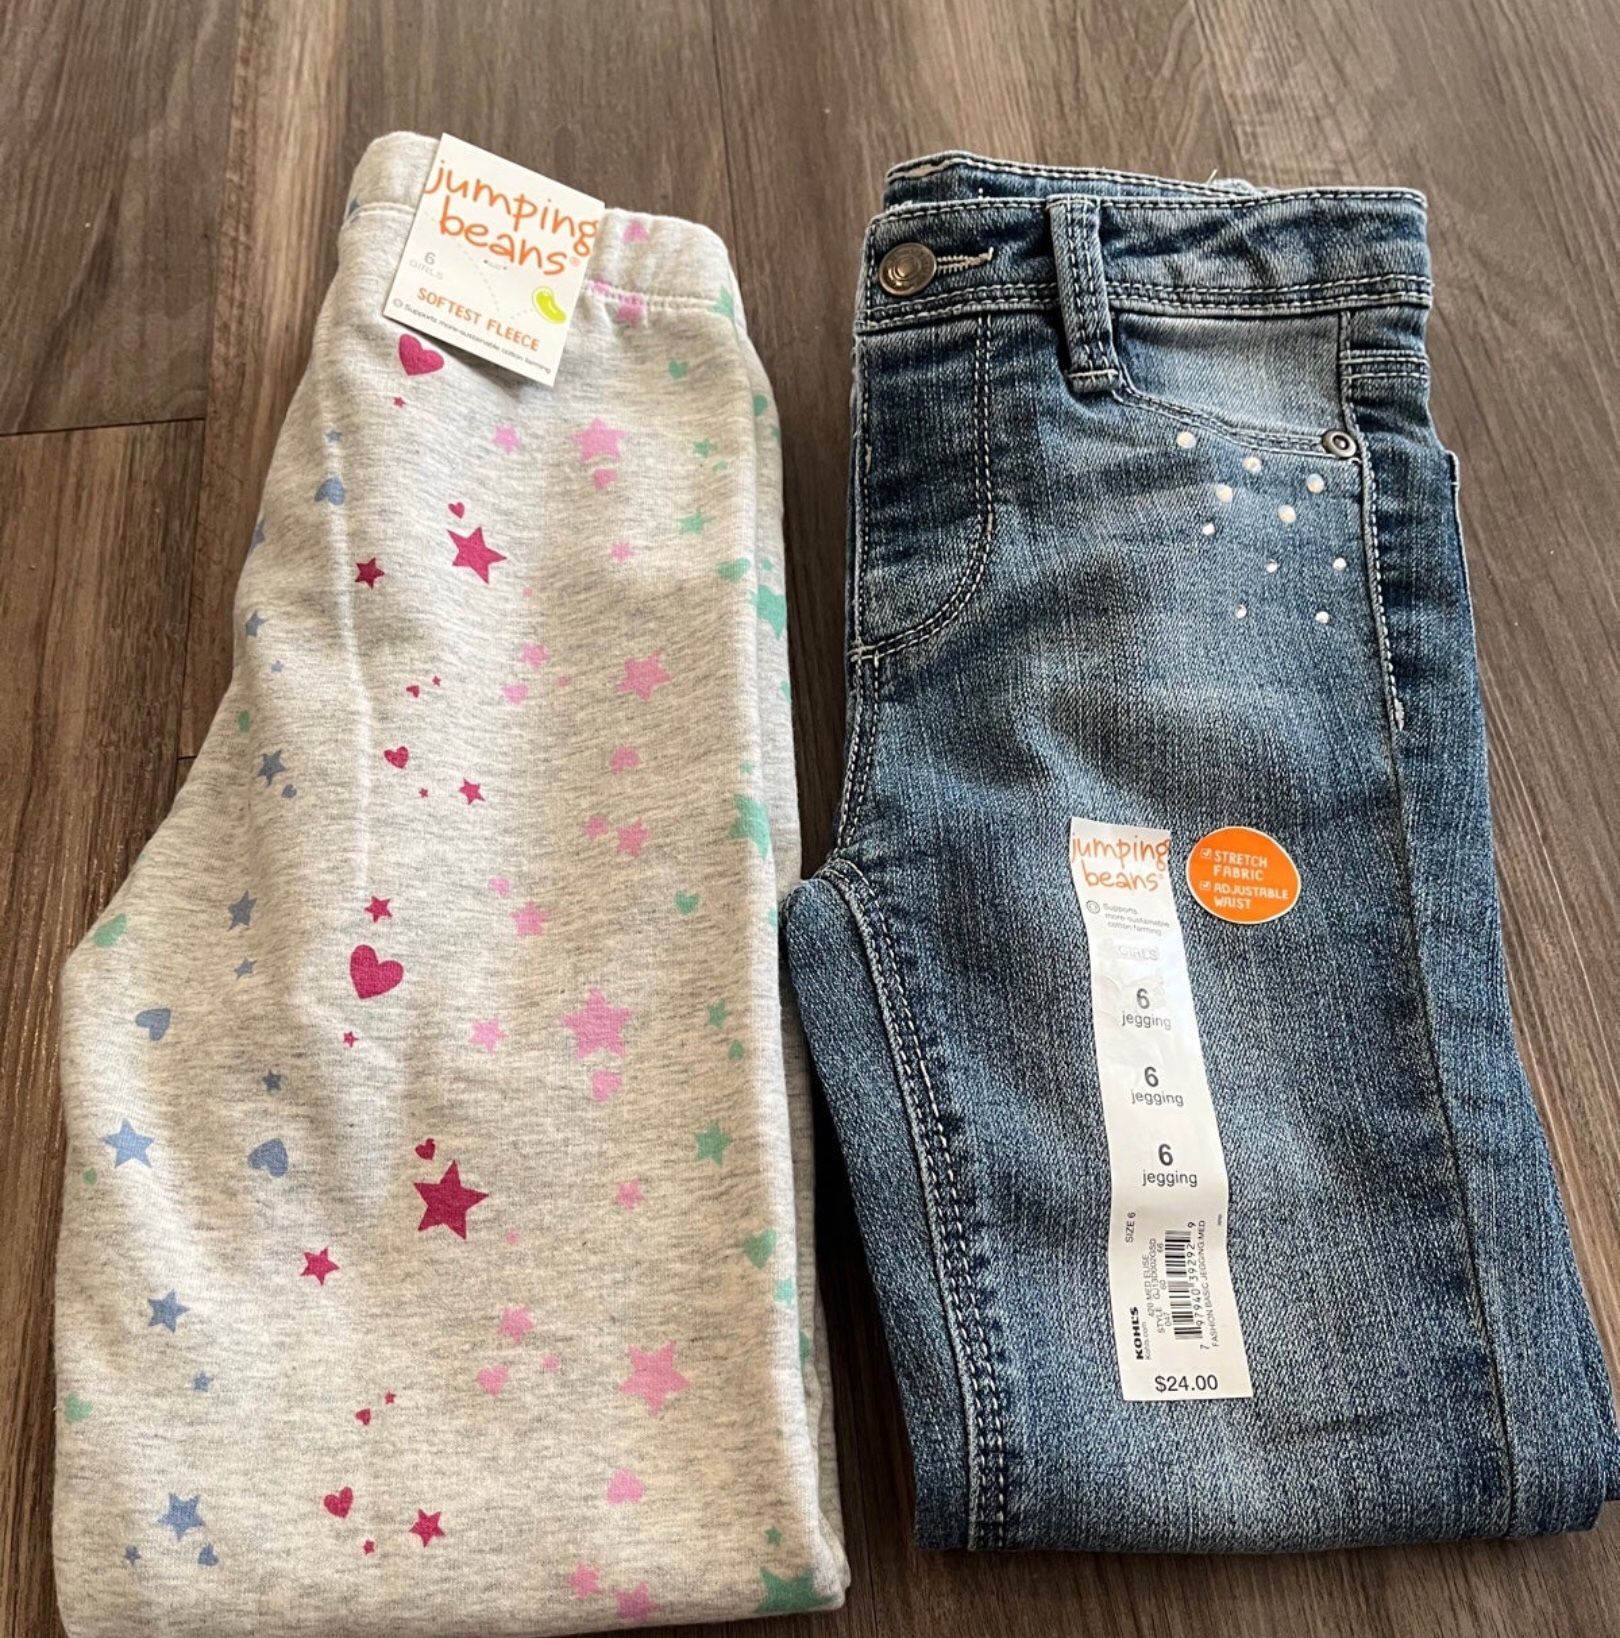 NWT - Girl’s Jumping Beans jeans and fleece leggings, Size 6